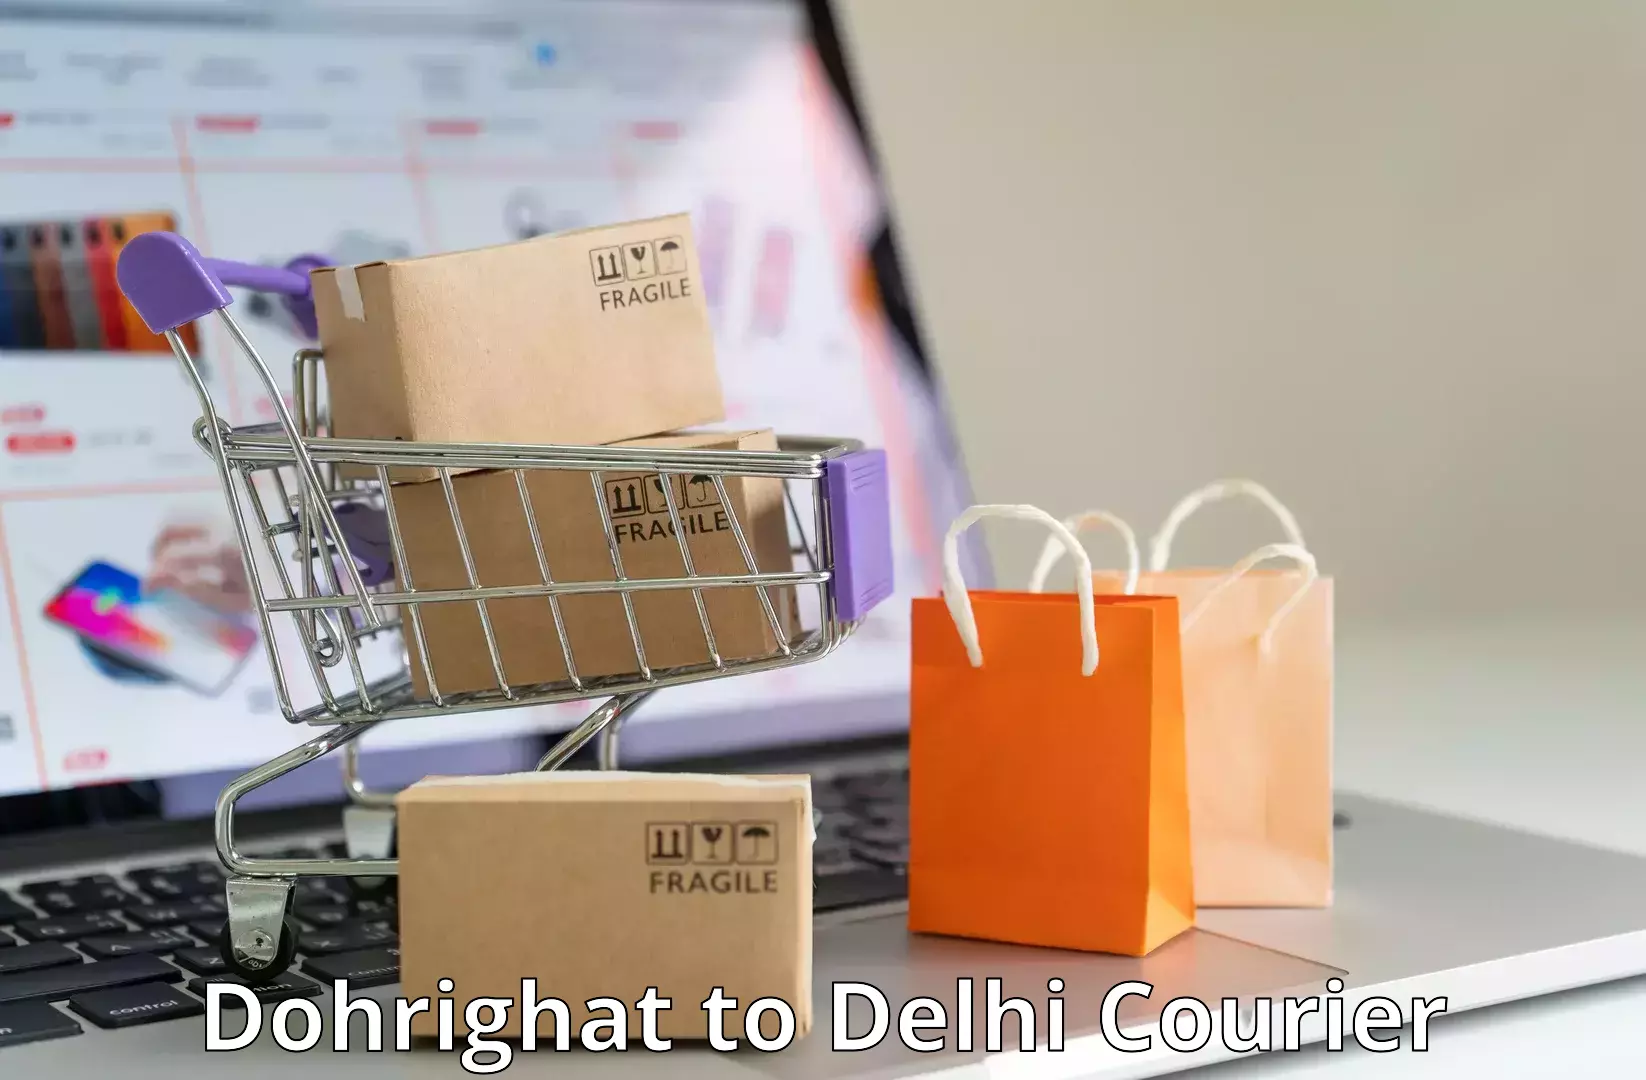 Logistics solutions Dohrighat to NCR